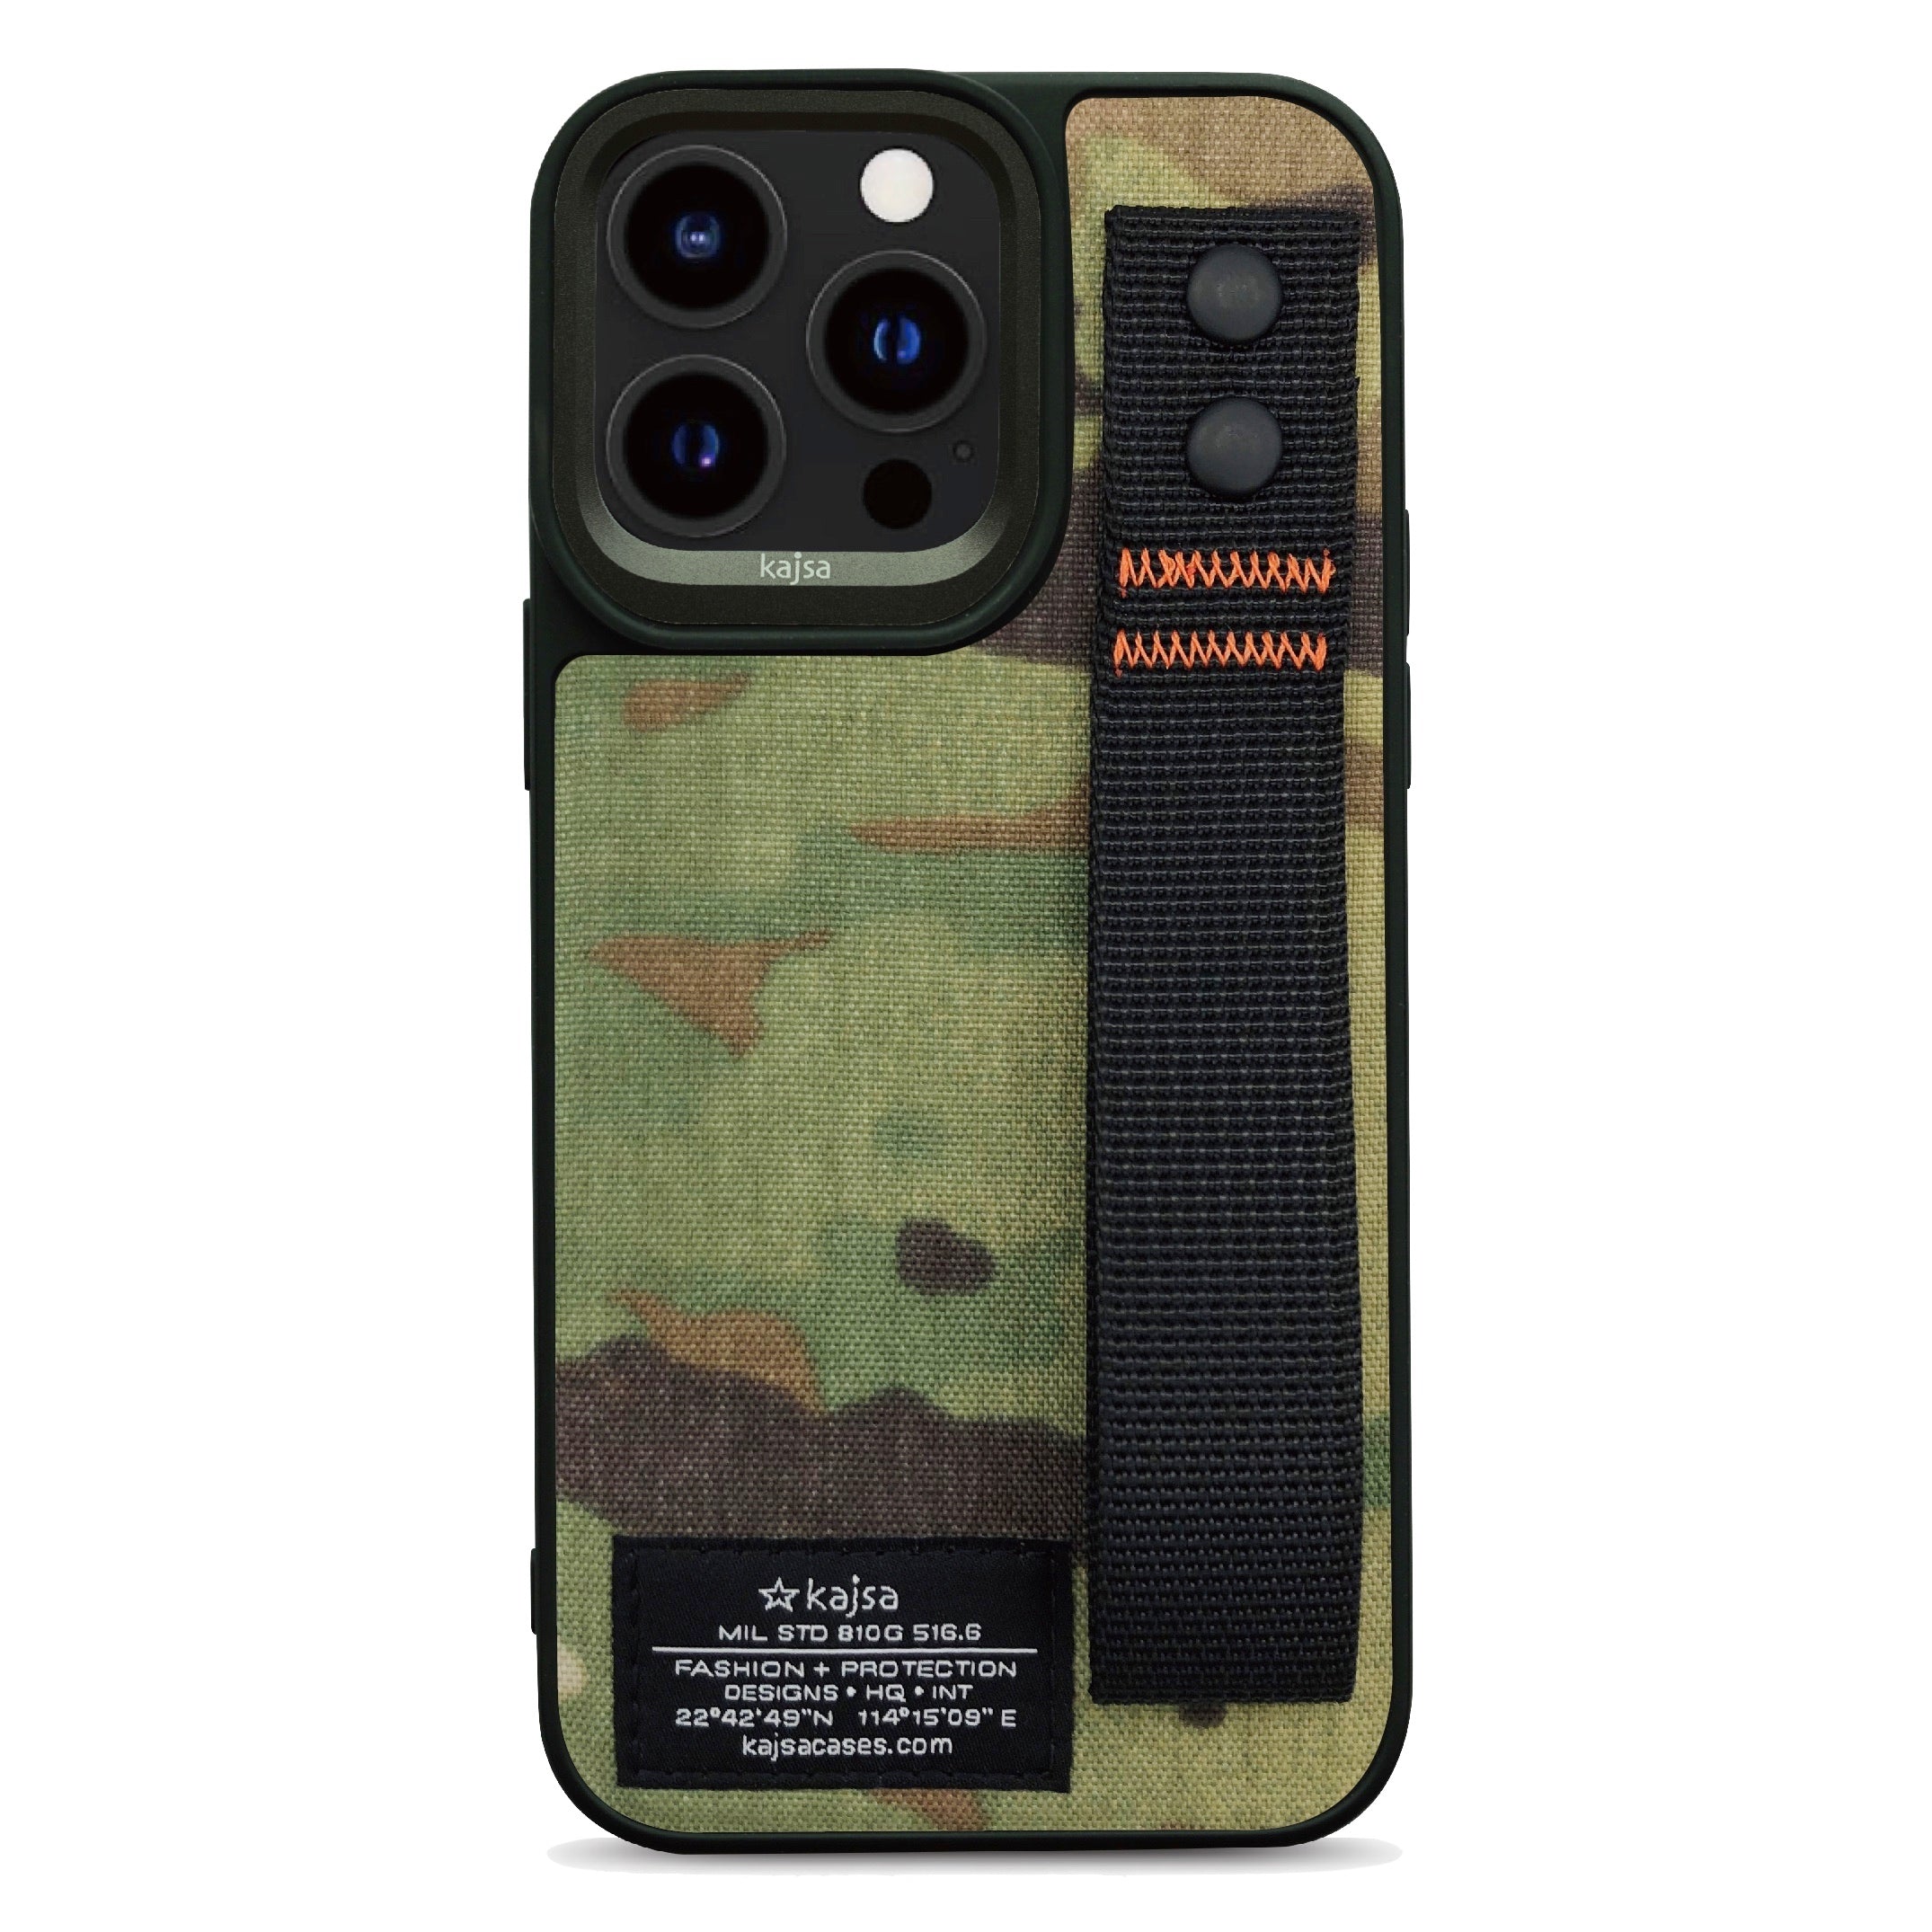 Military Collection - Straps Back Case for iPhone 14-Phone Case- phone case - phone cases- phone cover- iphone cover- iphone case- iphone cases- leather case- leather cases- DIYCASE - custom case - leather cover - hand strap case - croco pattern case - snake pattern case - carbon fiber phone case - phone case brand - unique phone case - high quality - phone case brand - protective case - buy phone case hong kong - online buy phone case - iphone‎手機殼 - 客製化手機殼 - samsung ‎手機殼 - 香港手機殼 - 買電話殼